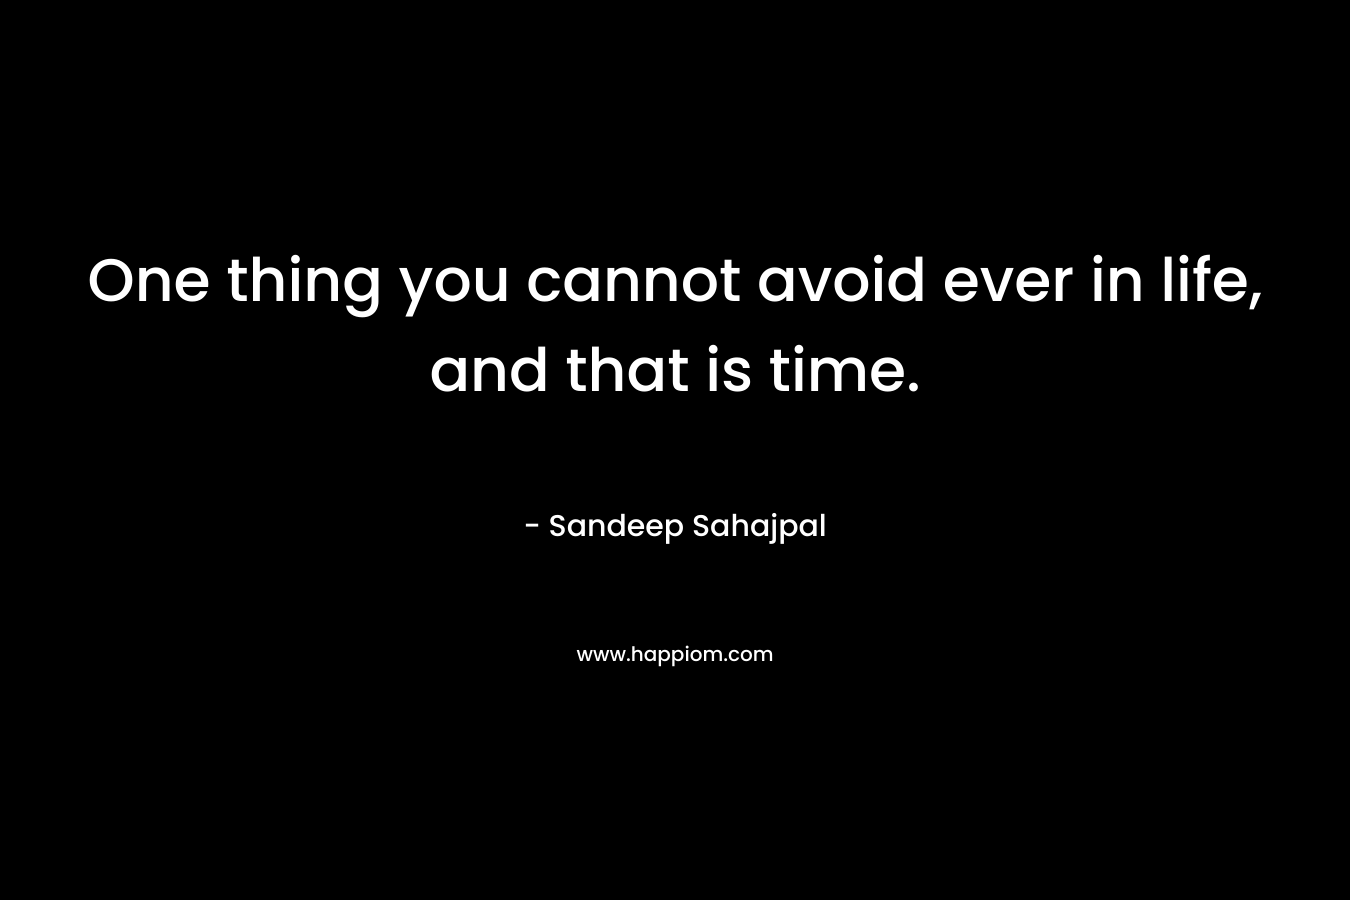 One thing you cannot avoid ever in life, and that is time.